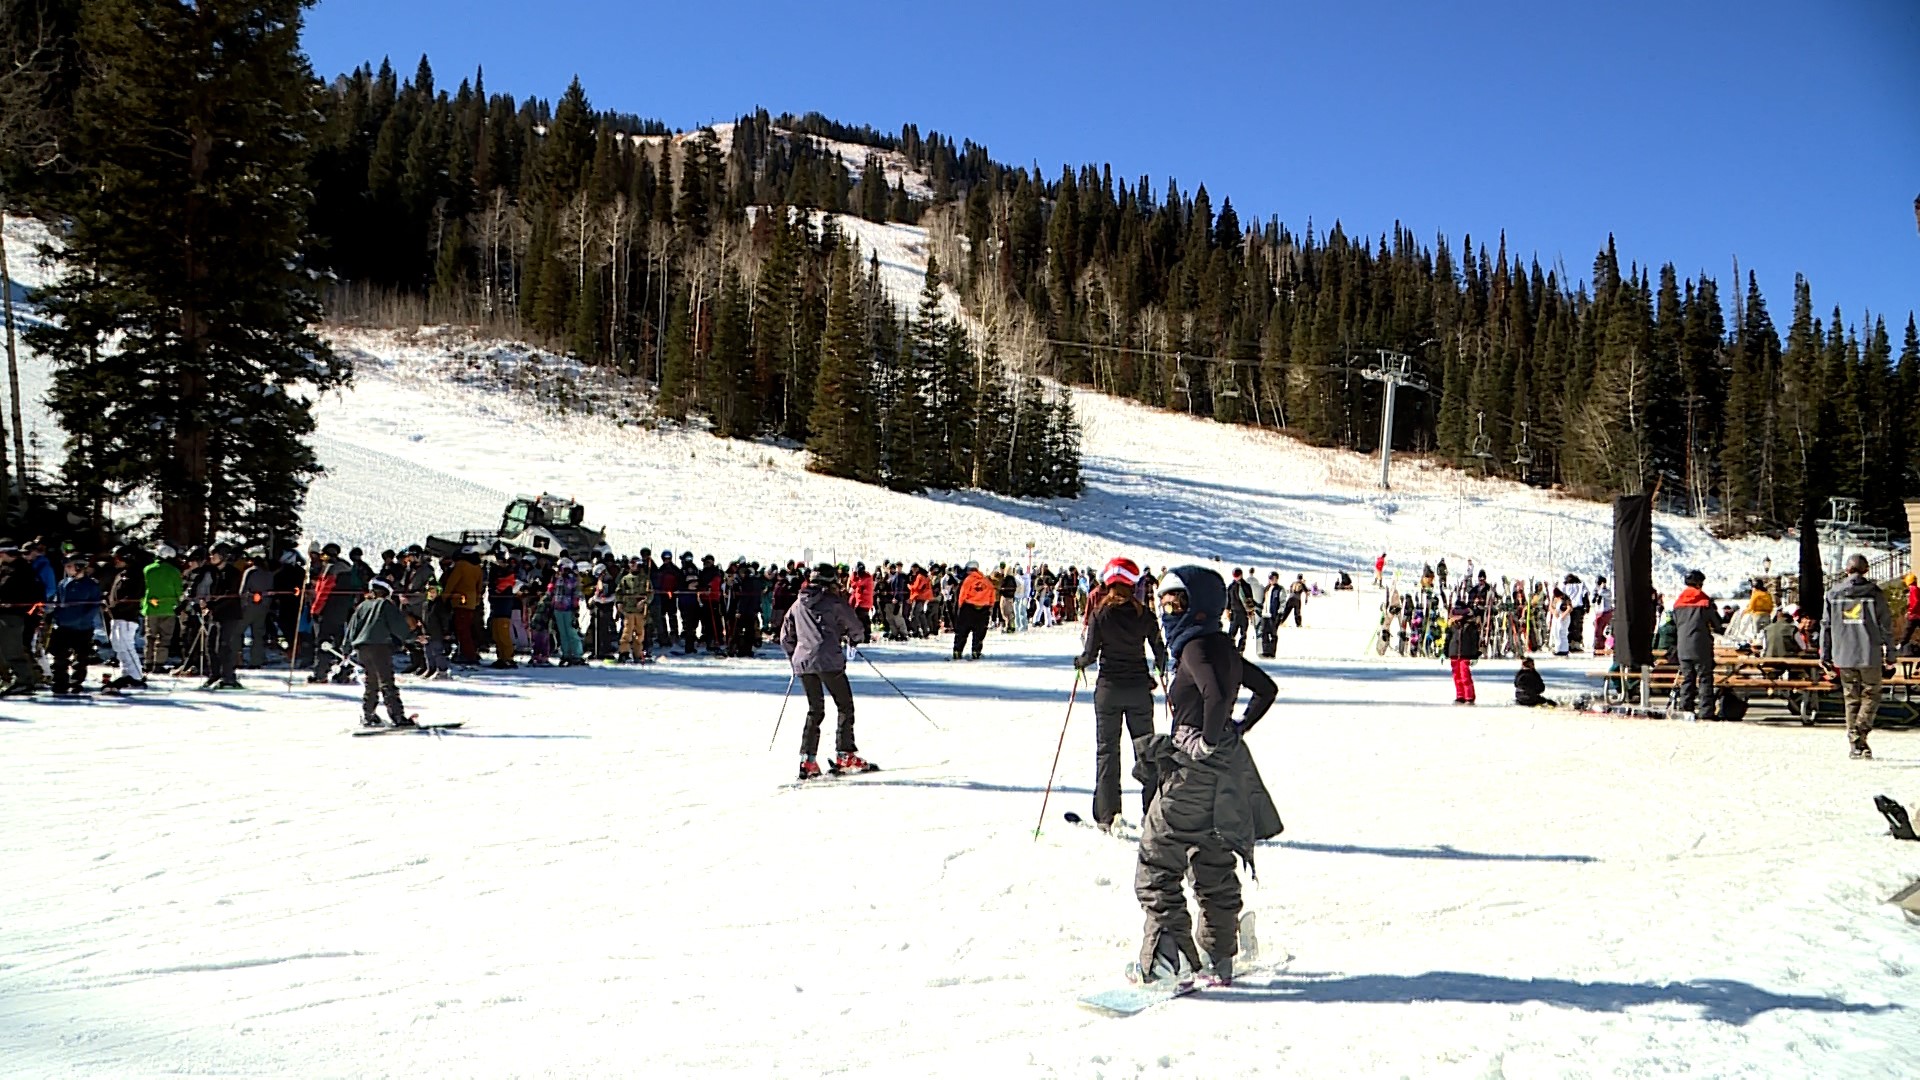 Hundreds of skiers and snowboarders alike waited in line, hopping on the ski lift one by one Sunday...